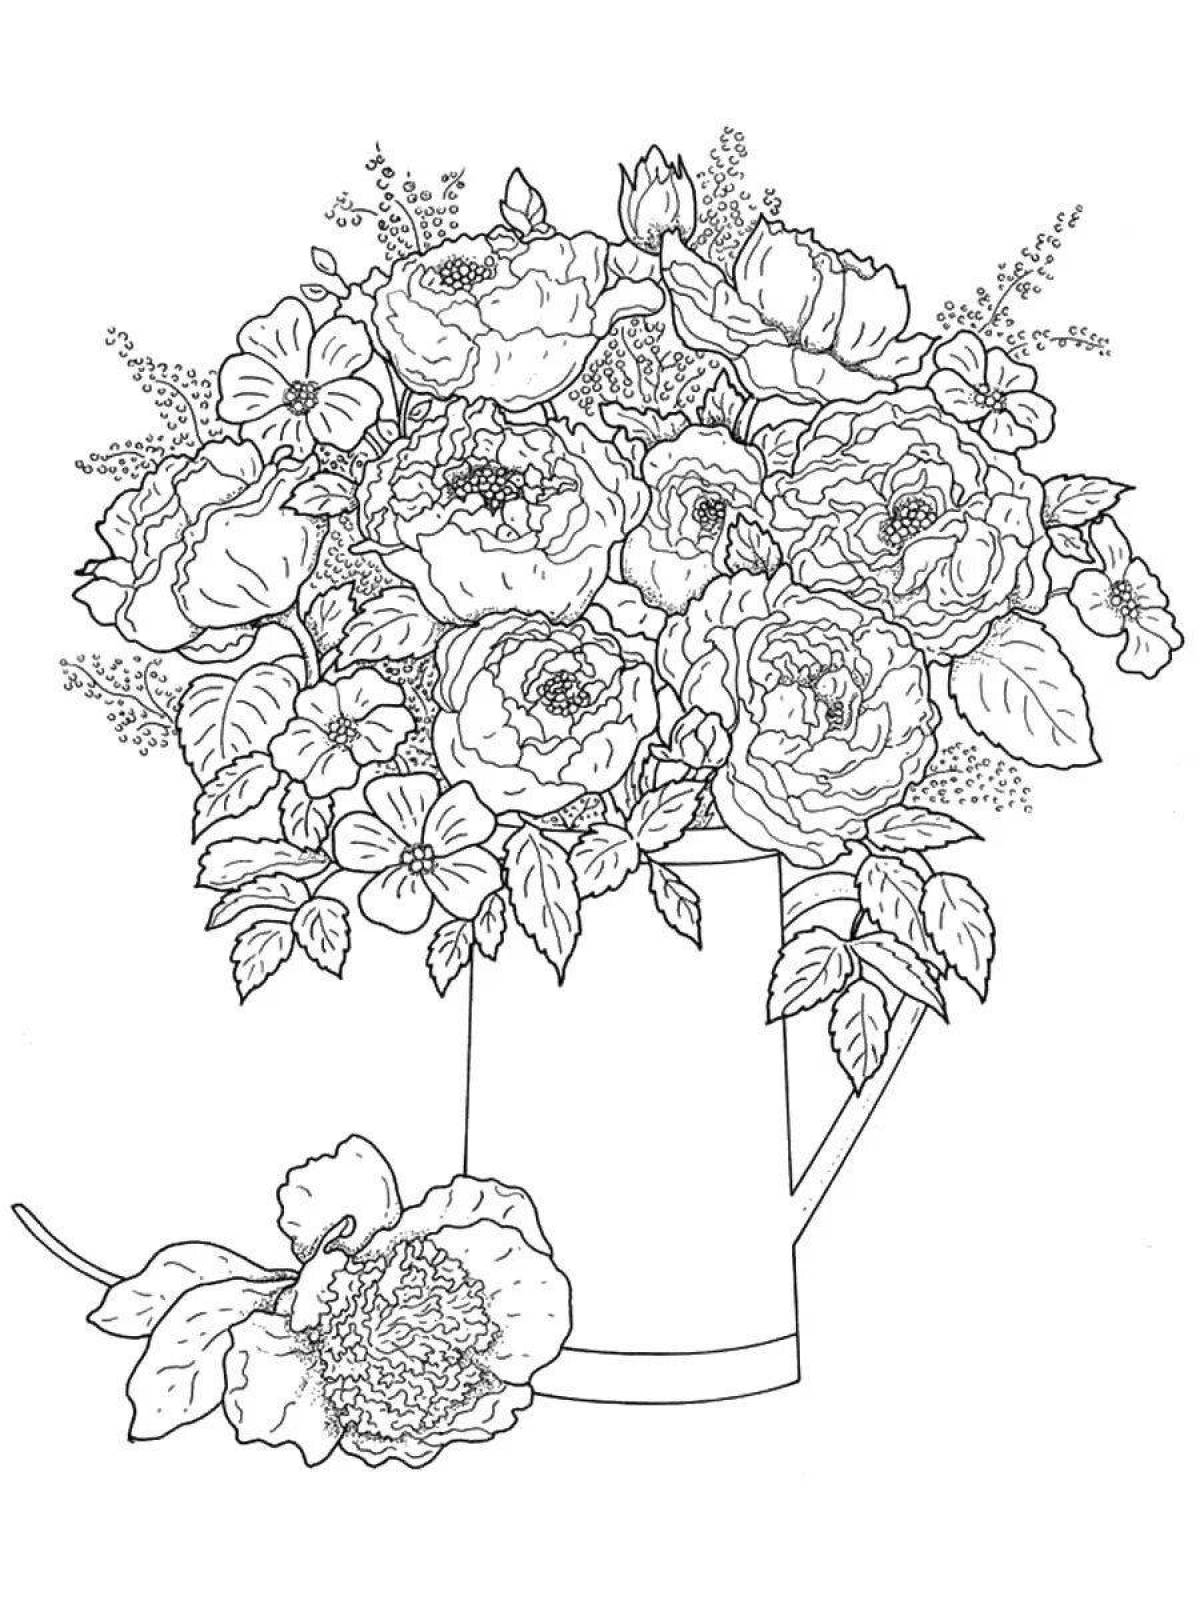 Coloring page captivating bouquet of flowers in a vase